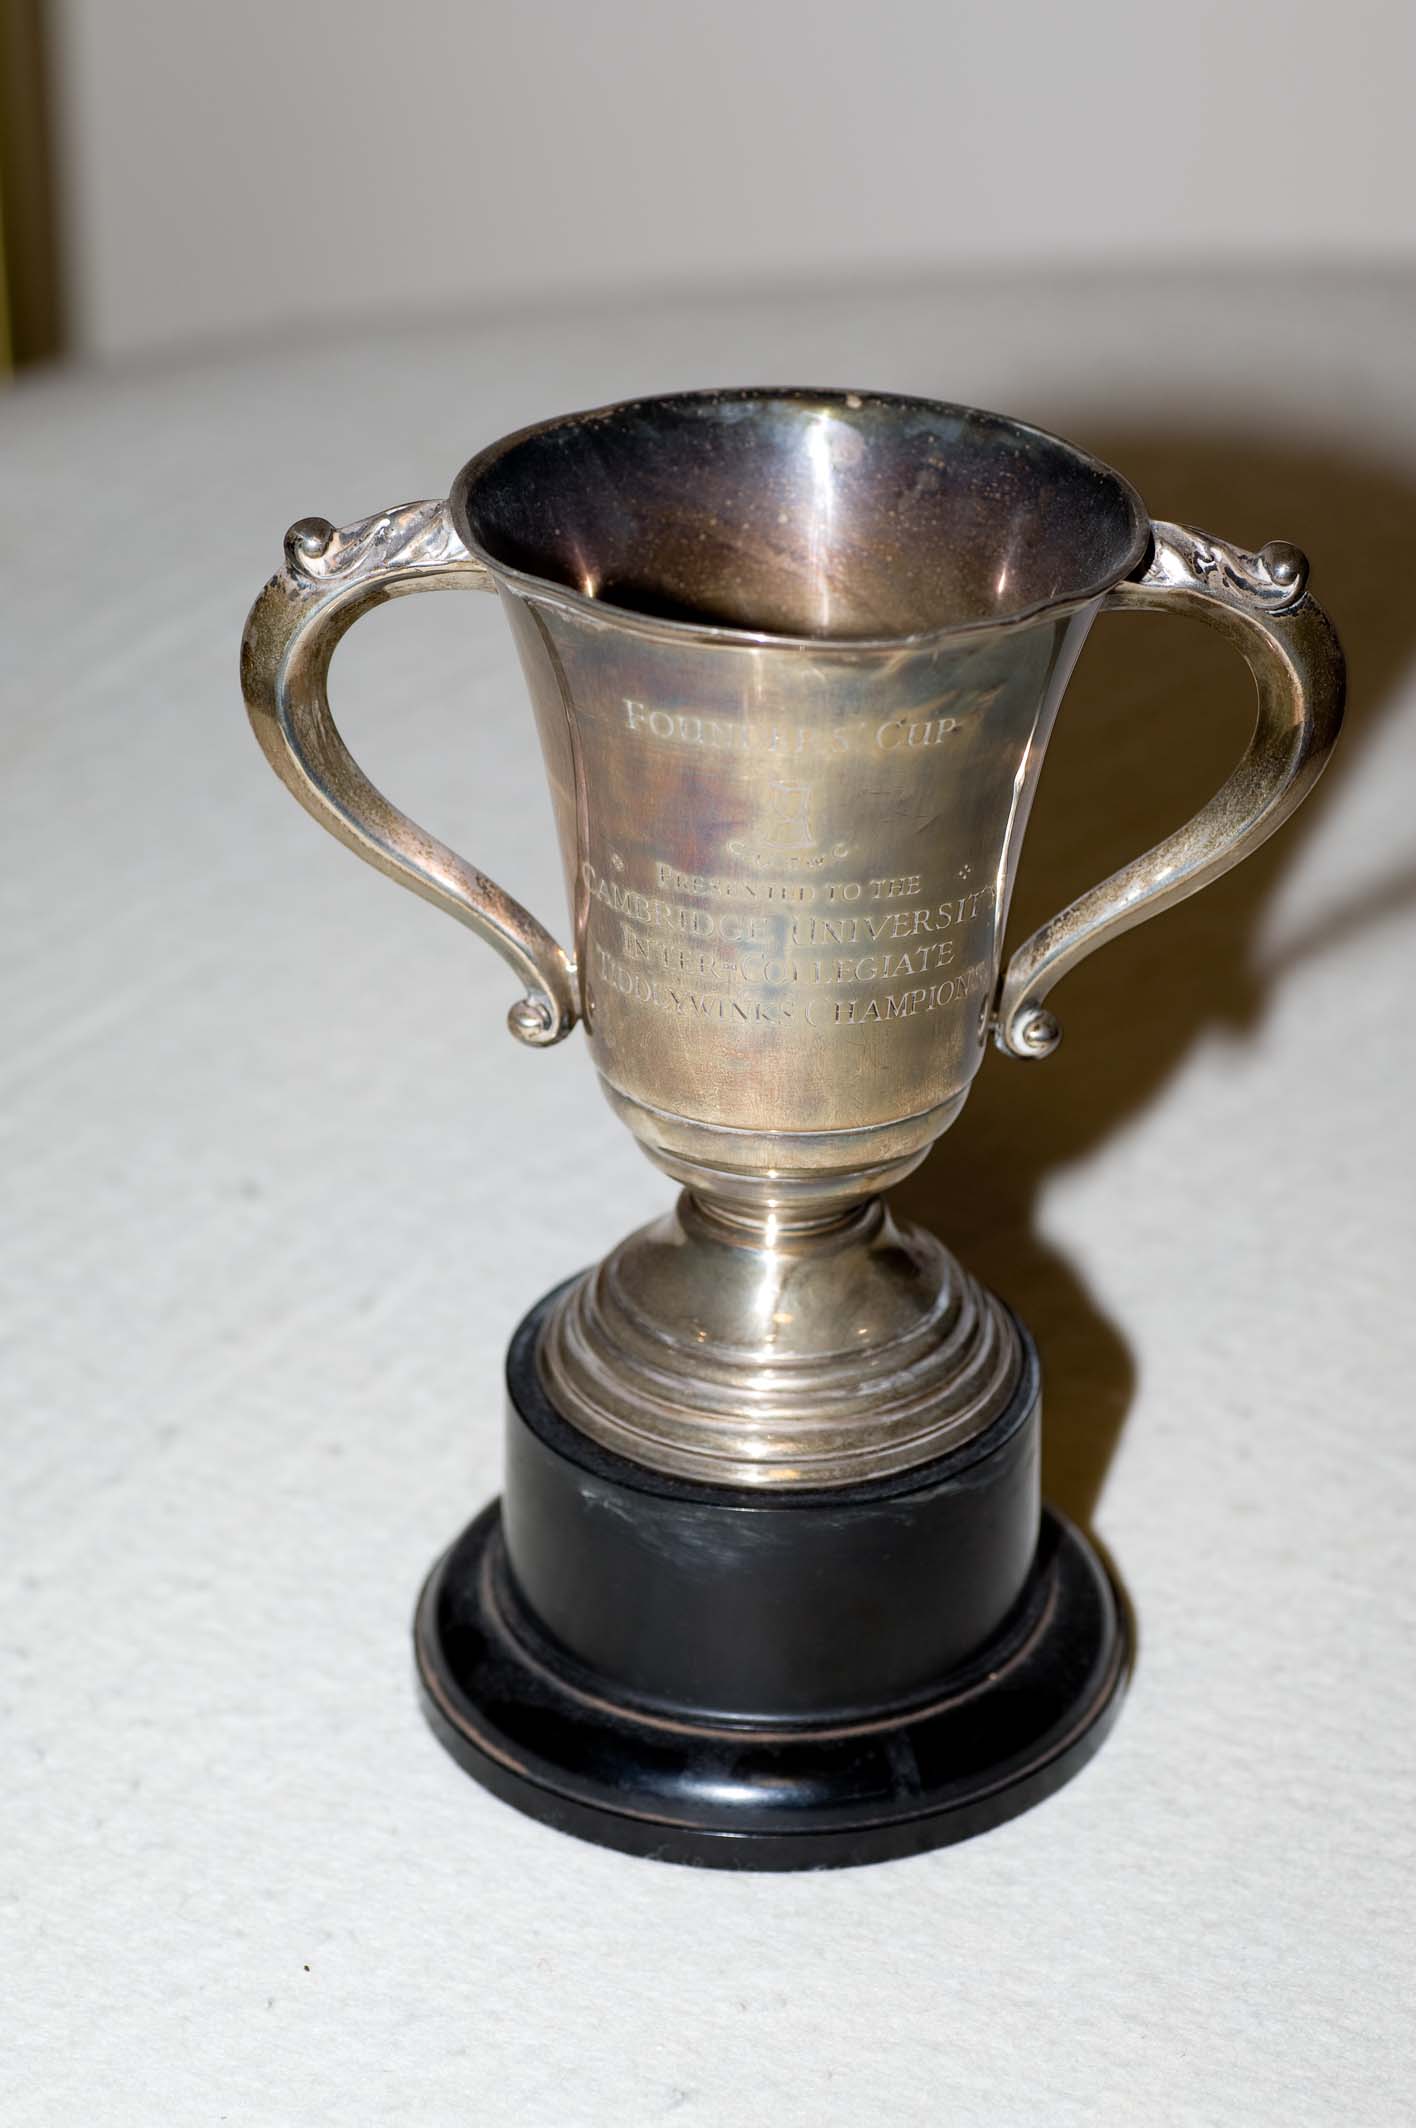 The Founders' Cup